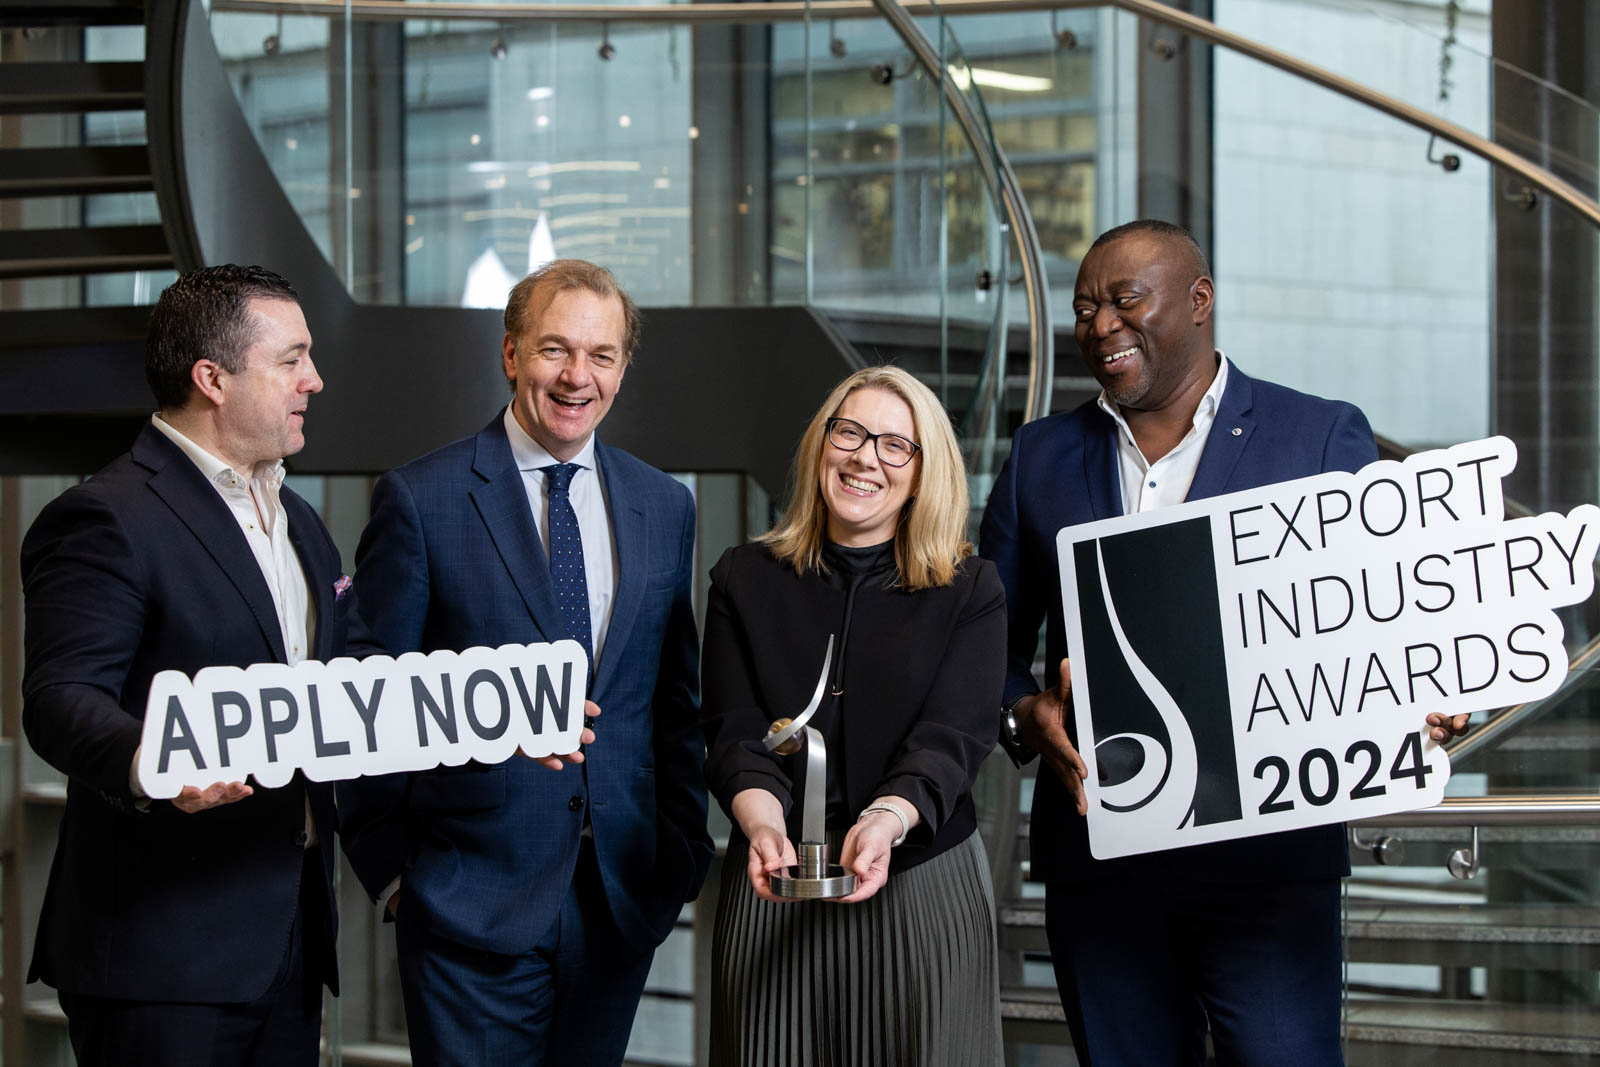 Launch of exporters awards, press call, pr, photocall, people laughing